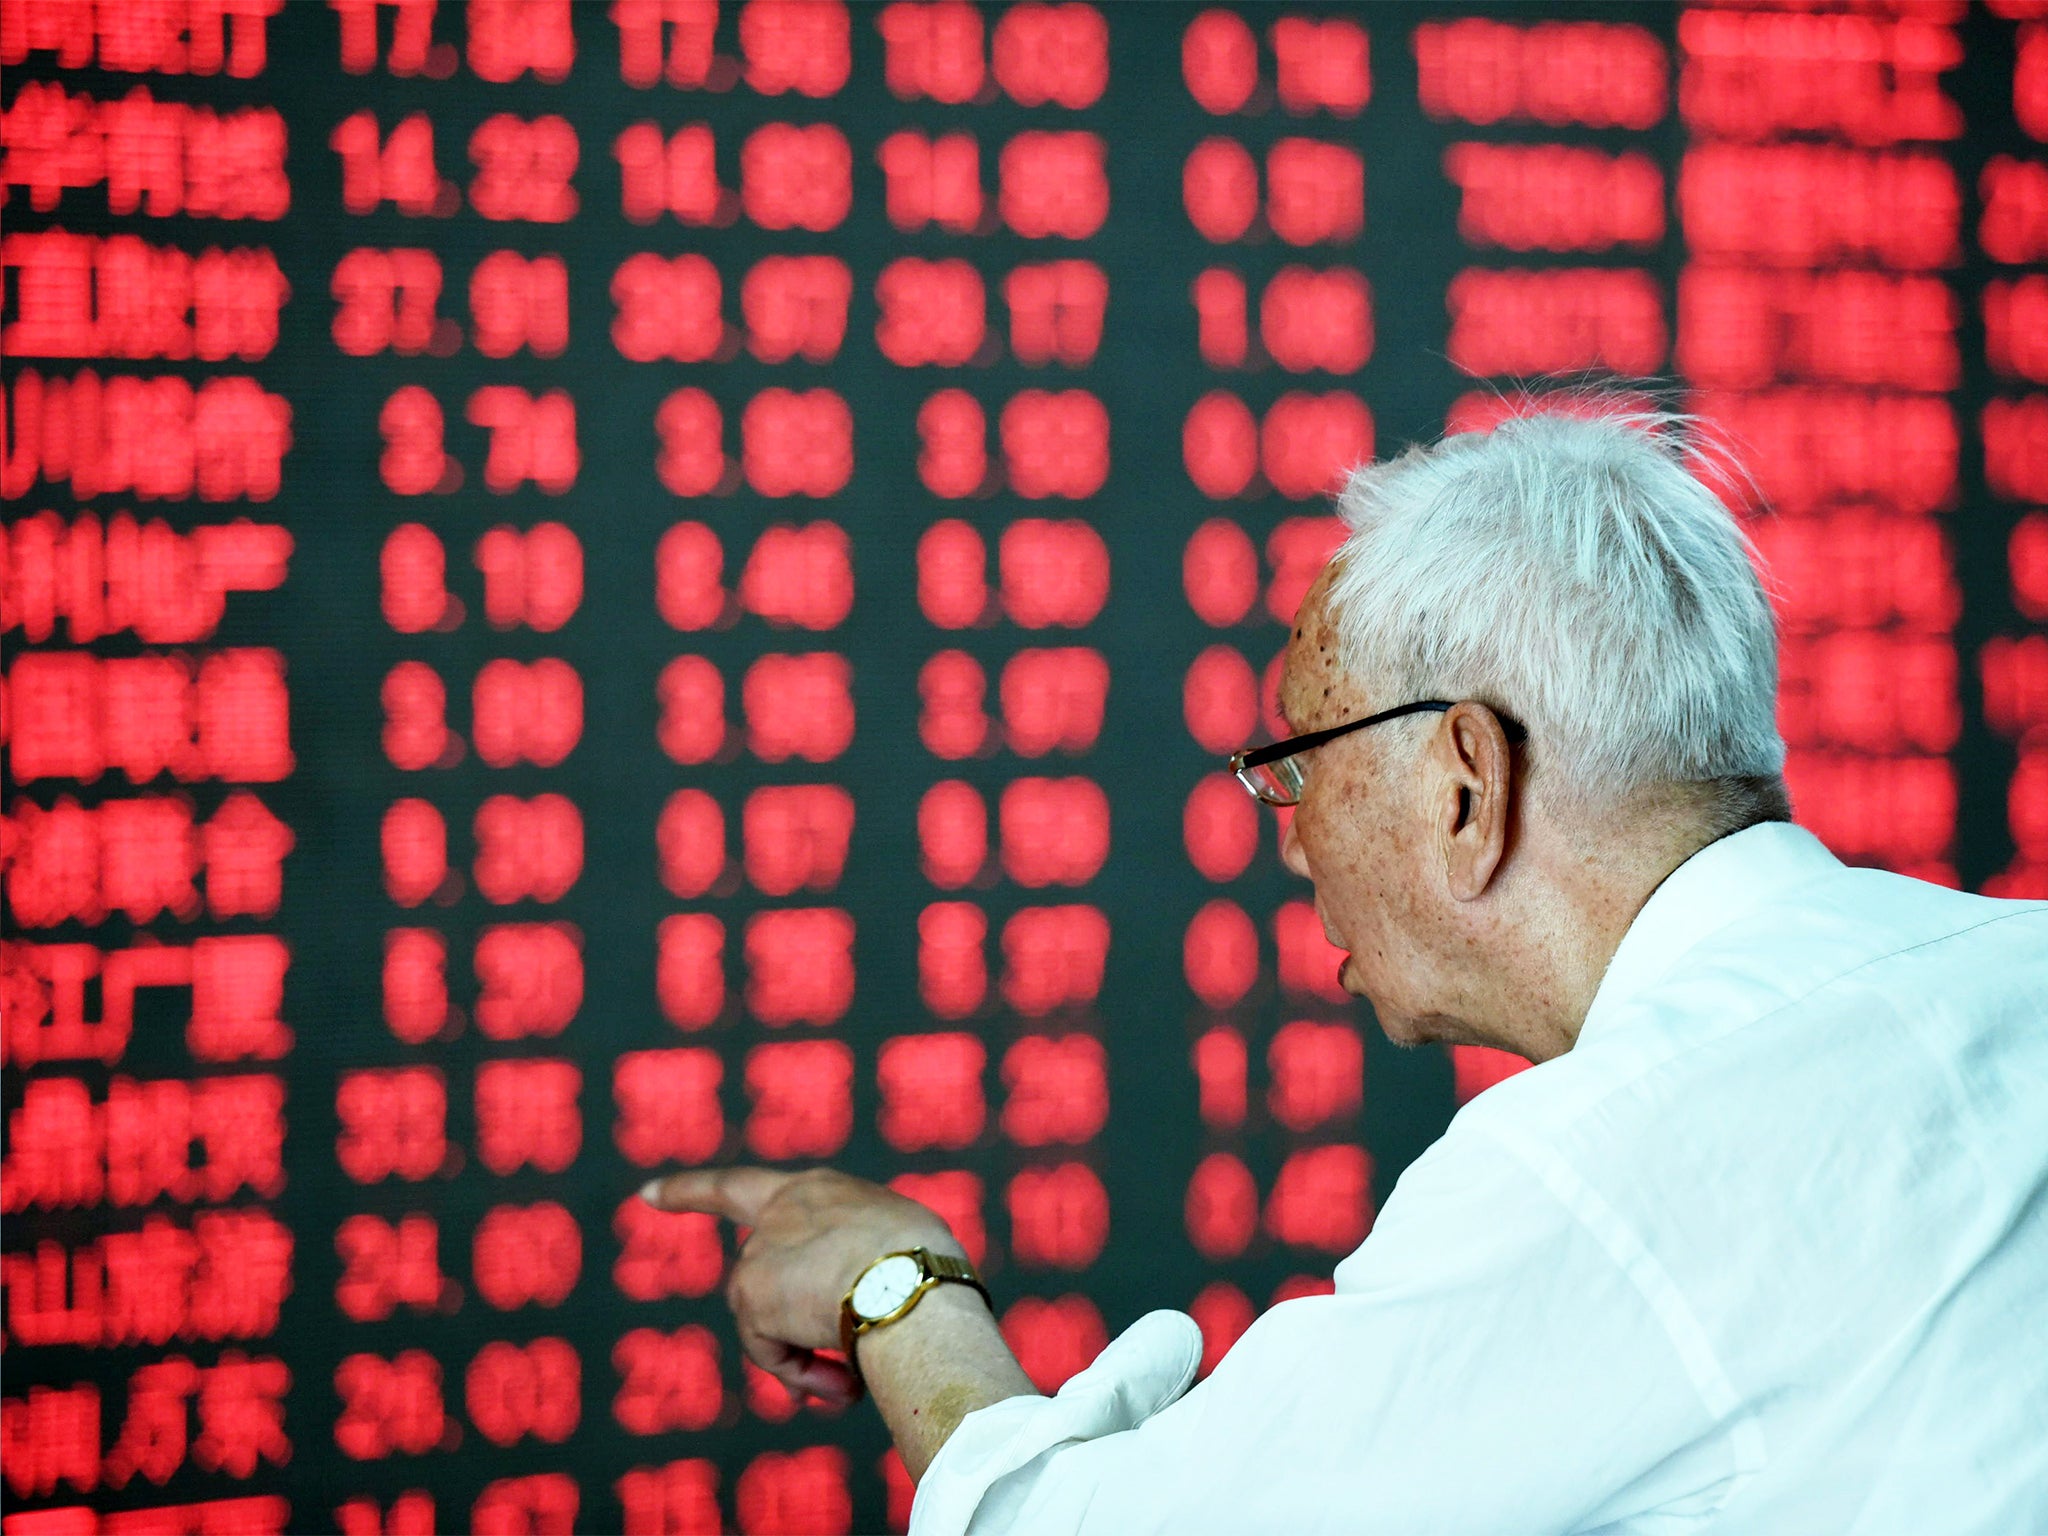 A Chinese investor takes a close look at a screen showing stock market movements in Hangzhou, eastern China, yesterday